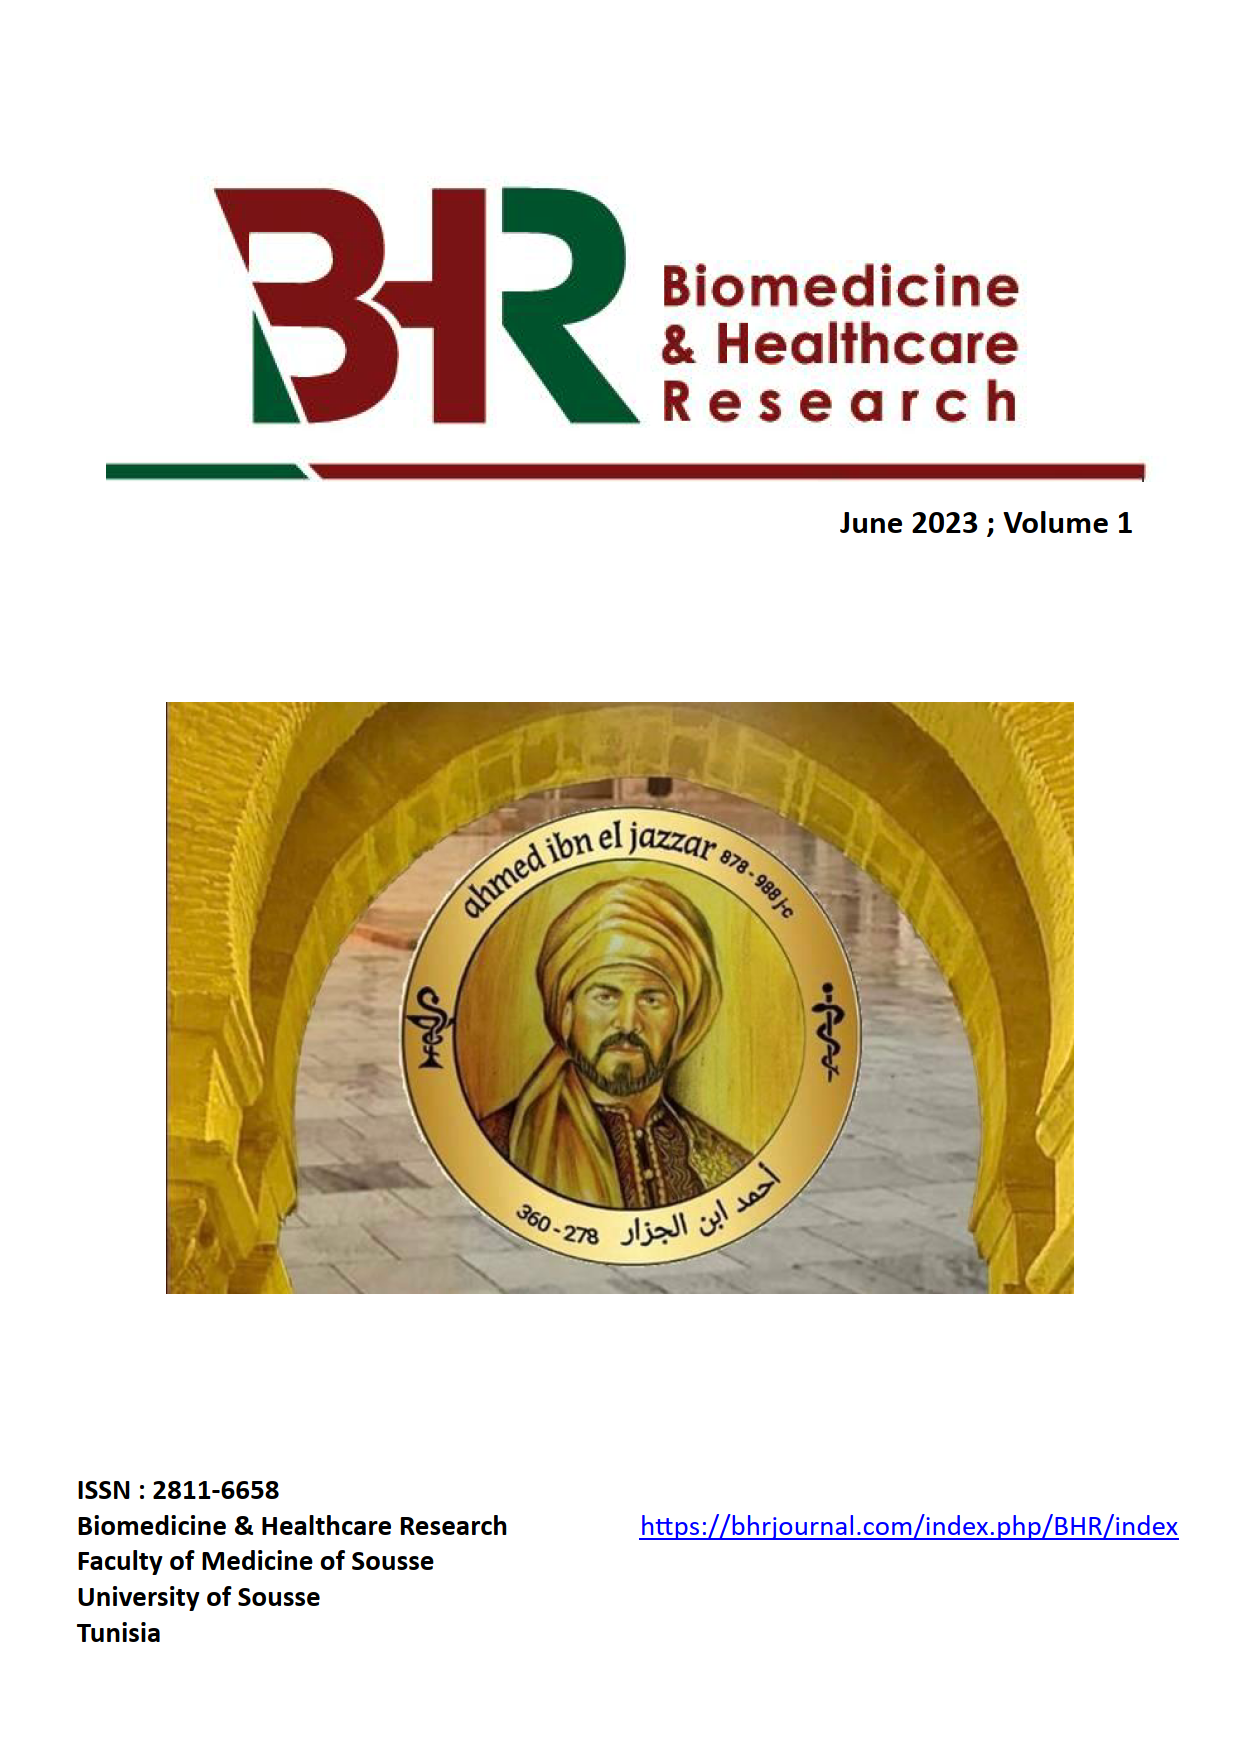 BHR journal issue 1 cover